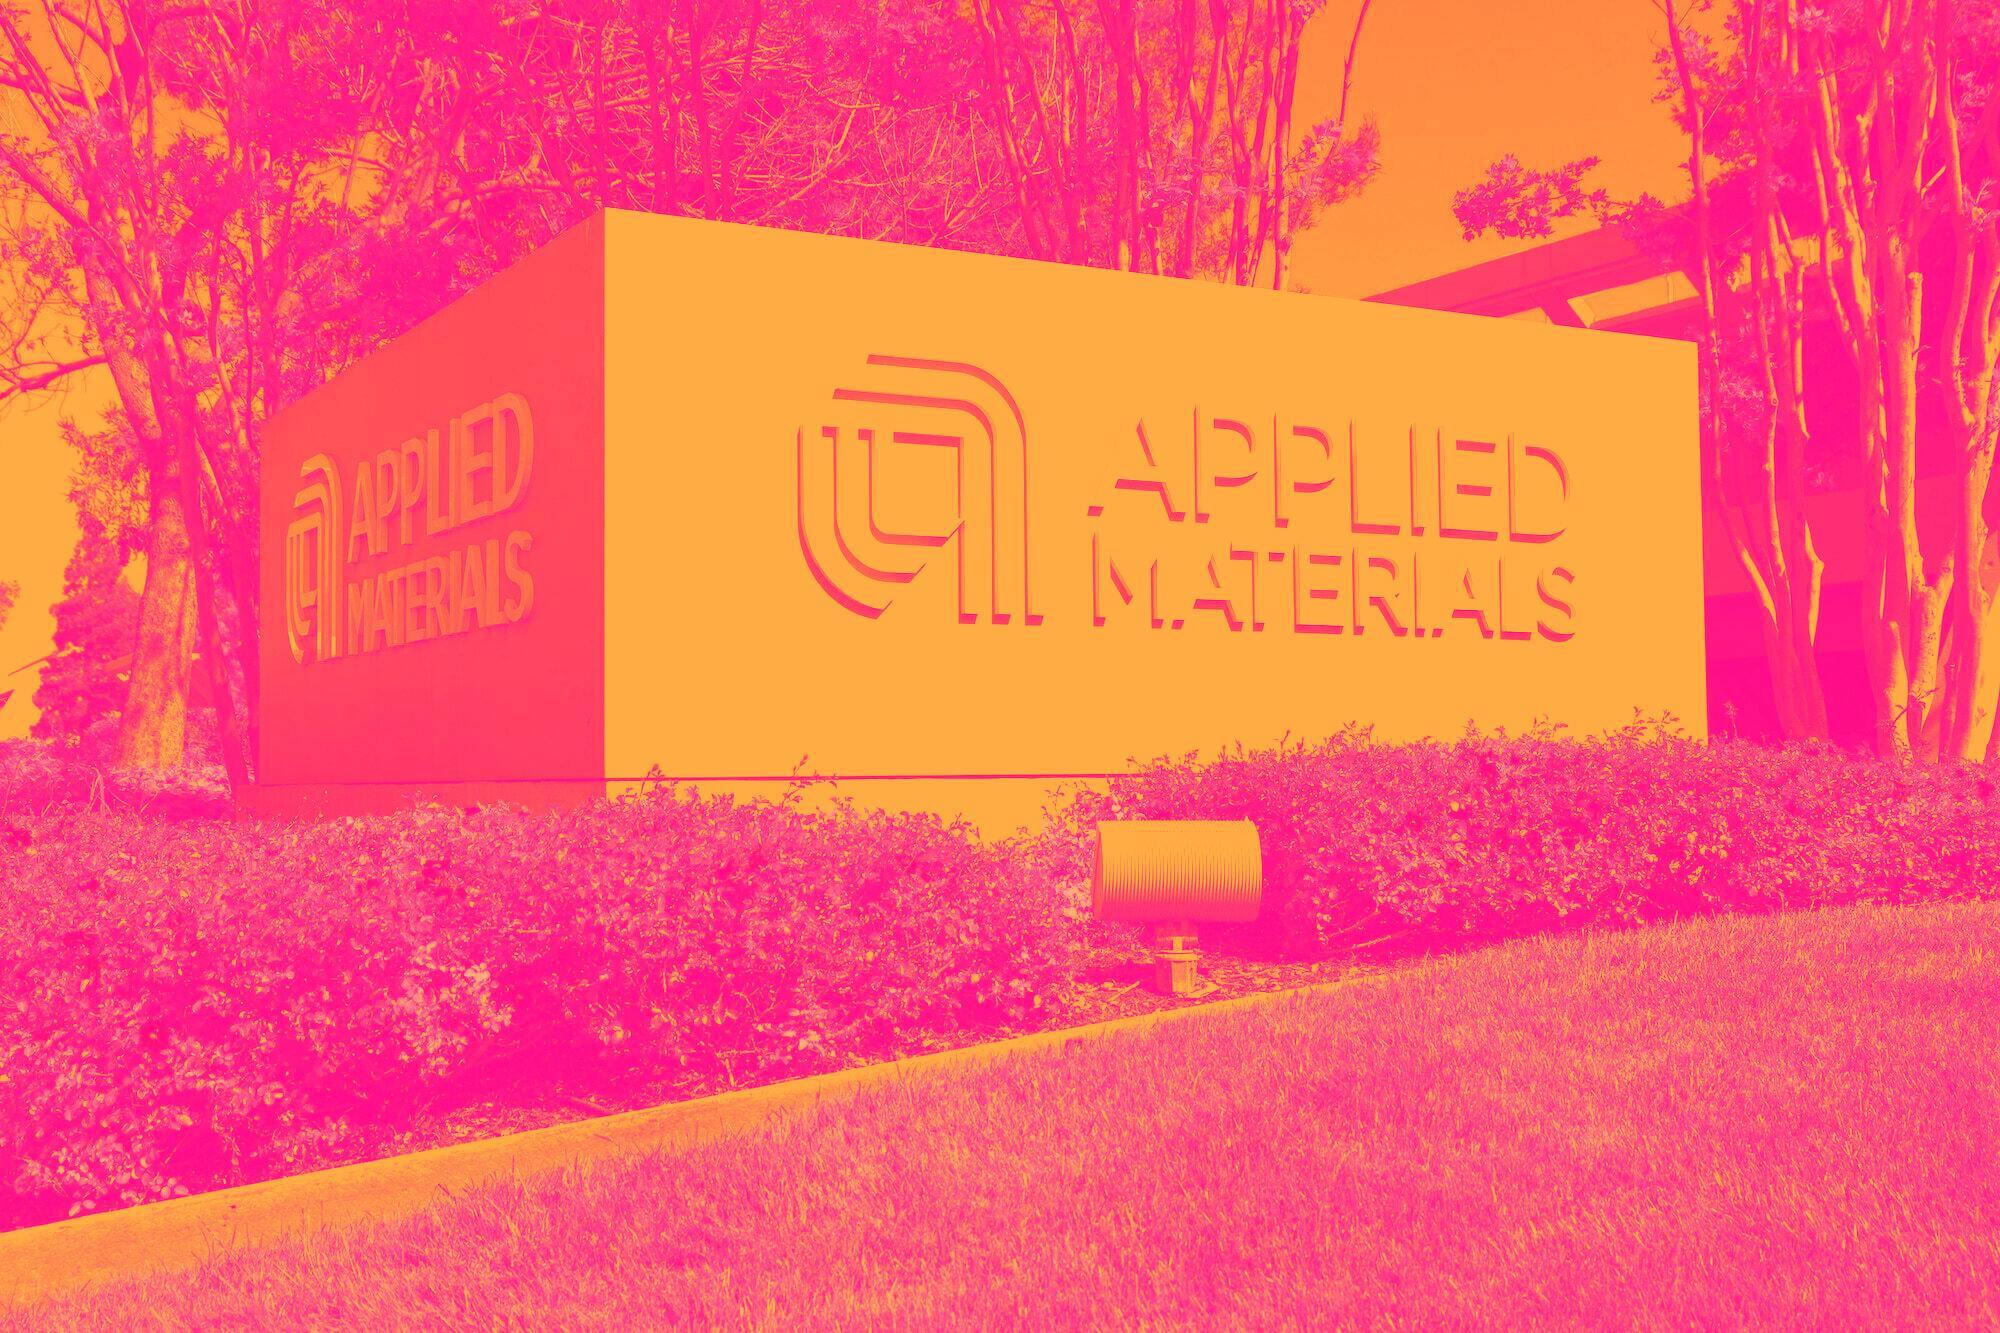 Applied materials cover image Pmogh B Bo